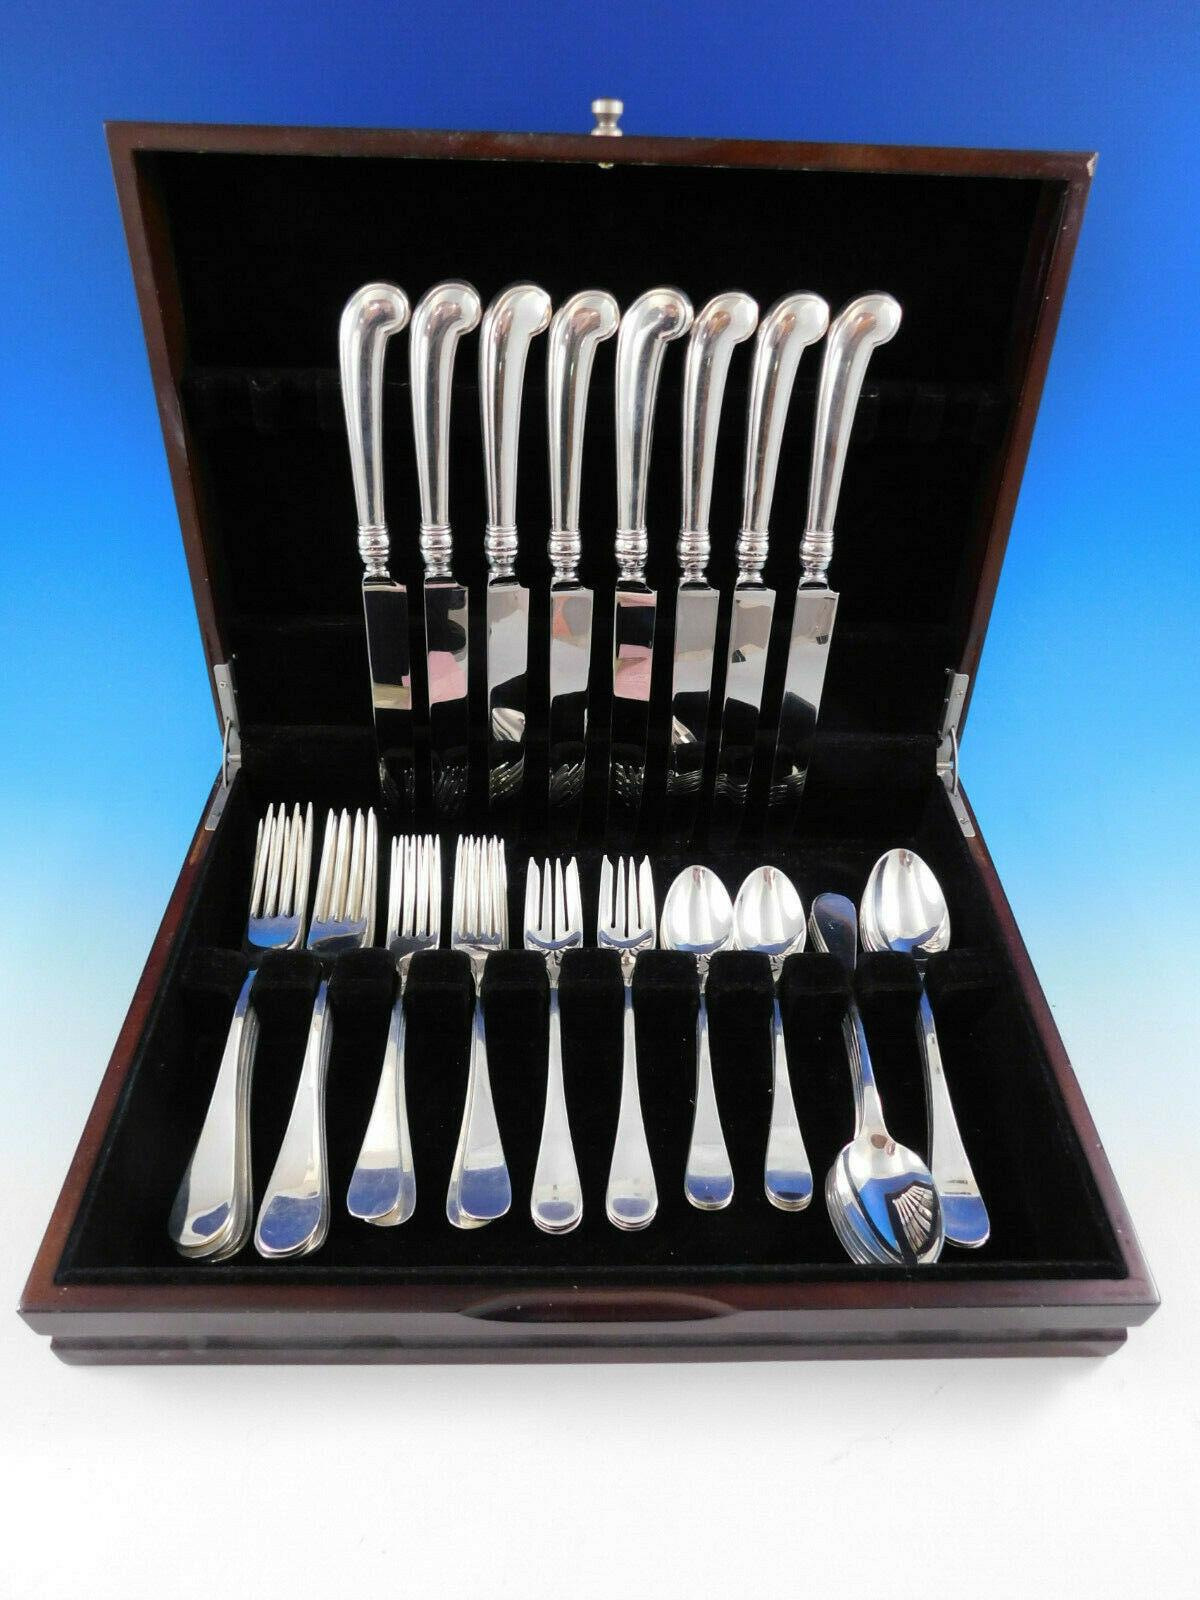 King William by Tiffany & Co. sterling silver flatware set, 48 pieces. This Old English style pattern was introduced in the year 1870. The pieces are large and heavy, with wonderful pistol grip handle knives. This set includes:

8 large dinner size